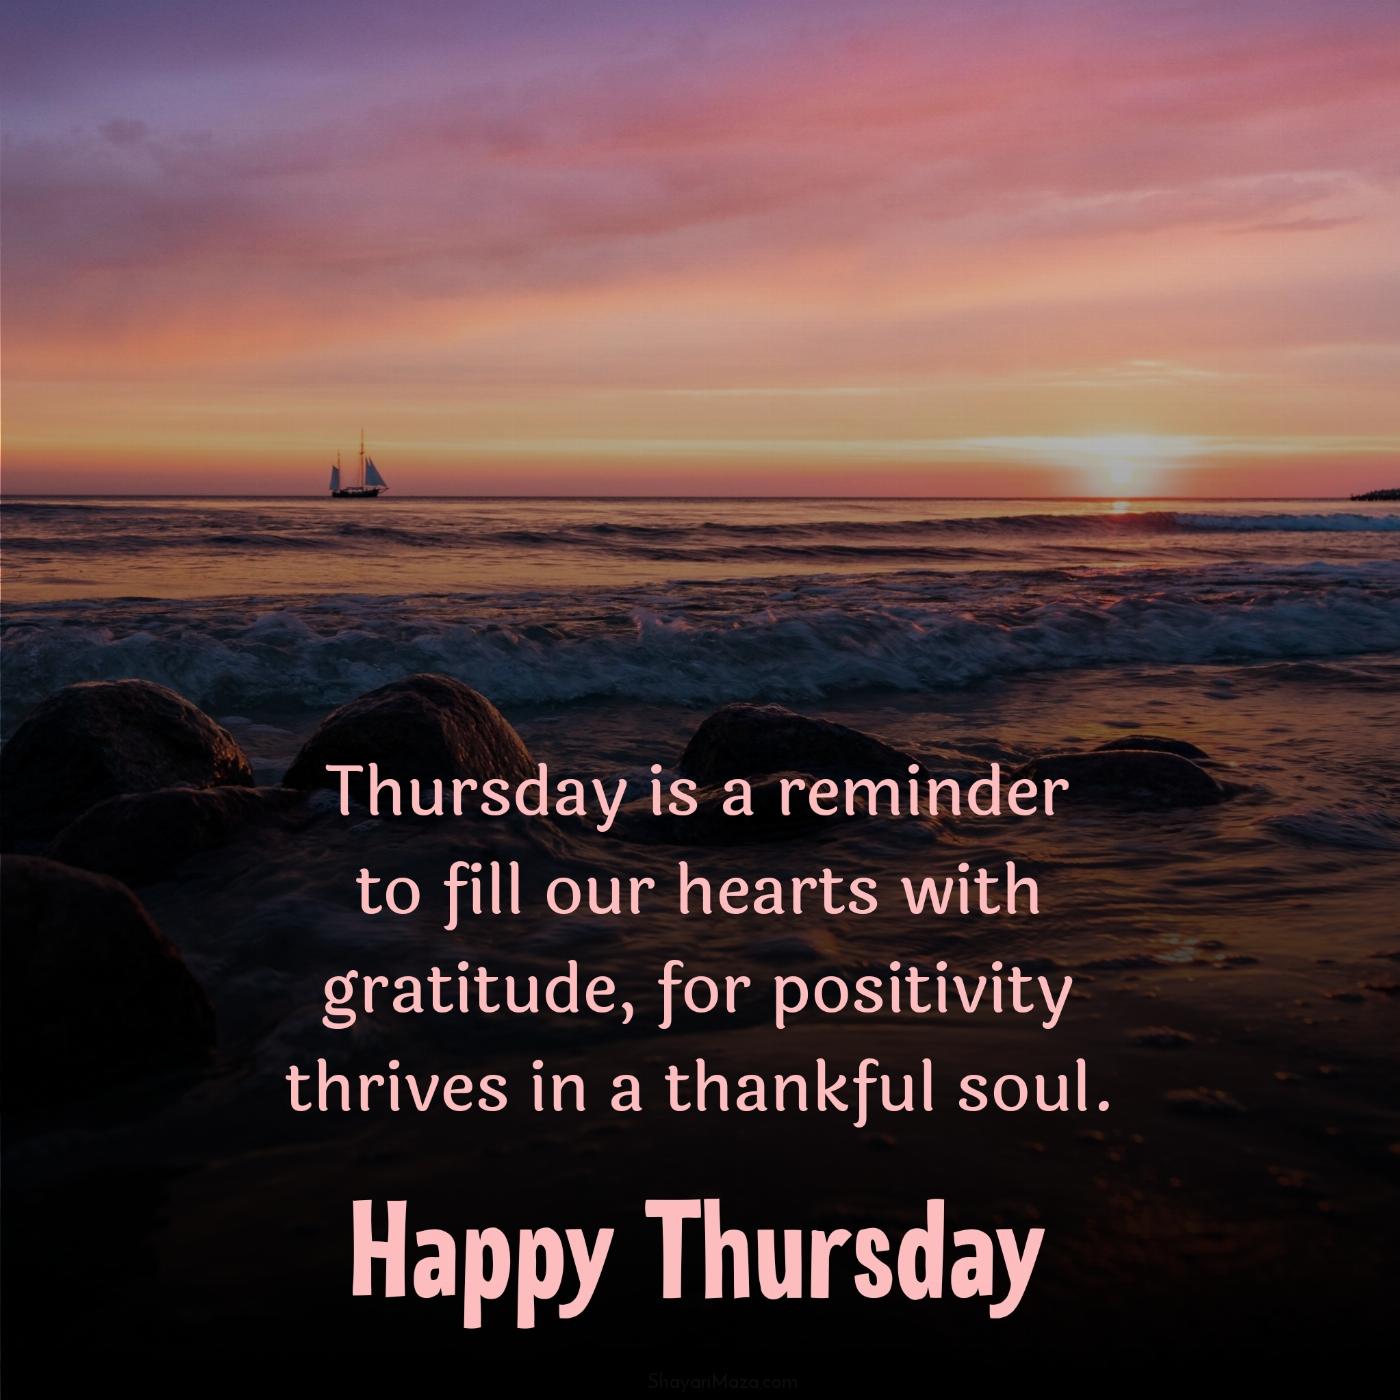 Thursday is a reminder to fill our hearts with gratitude